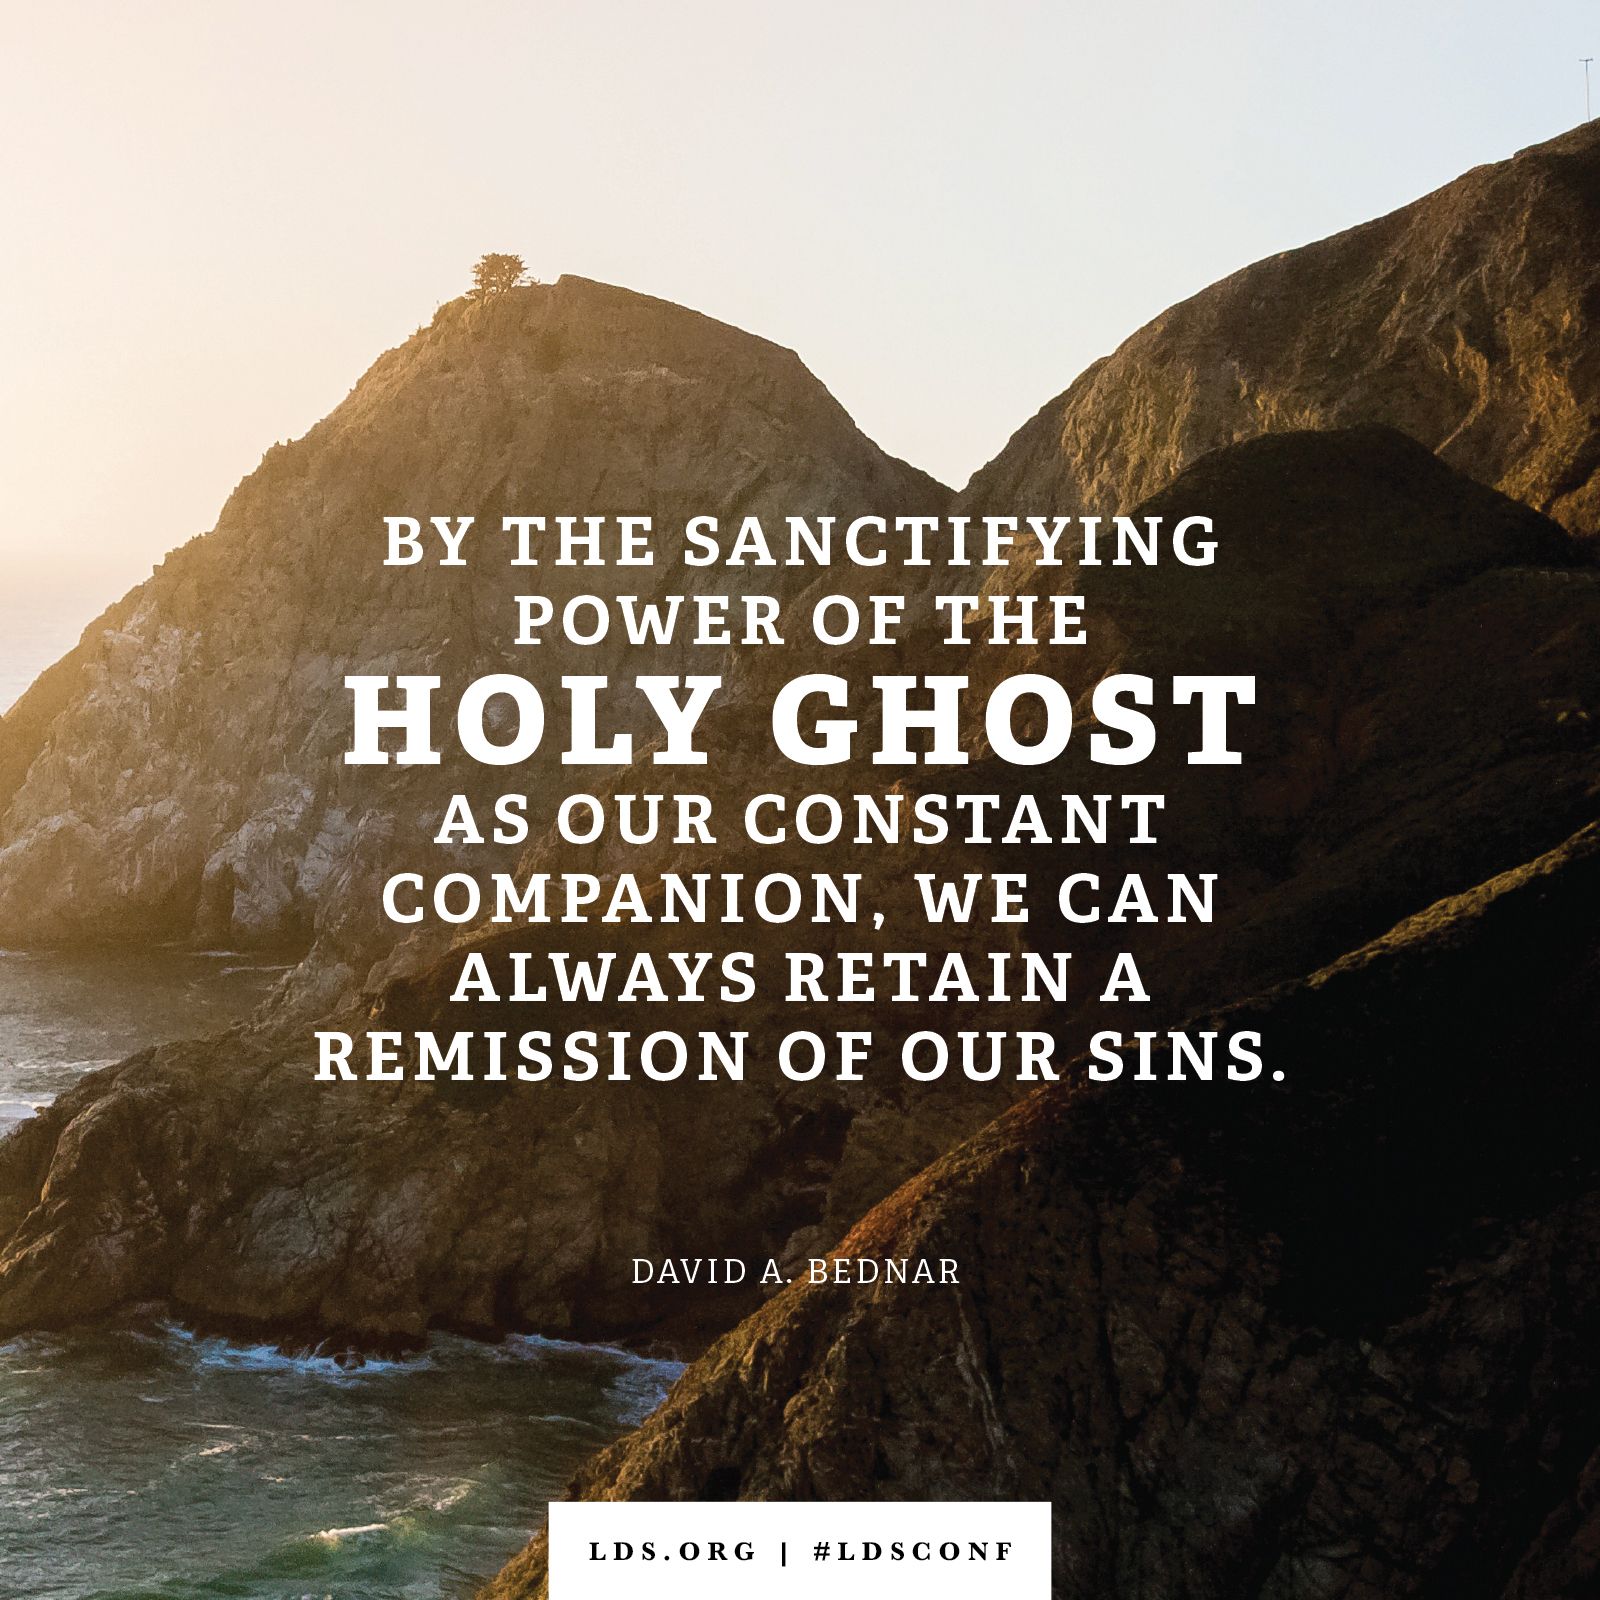 “By the sanctifying power of the Holy Ghost as our constant companion, we can always retain a remission of our sins.” —Elder David A. Bednar, “Always Retain a Remission of Your Sins”